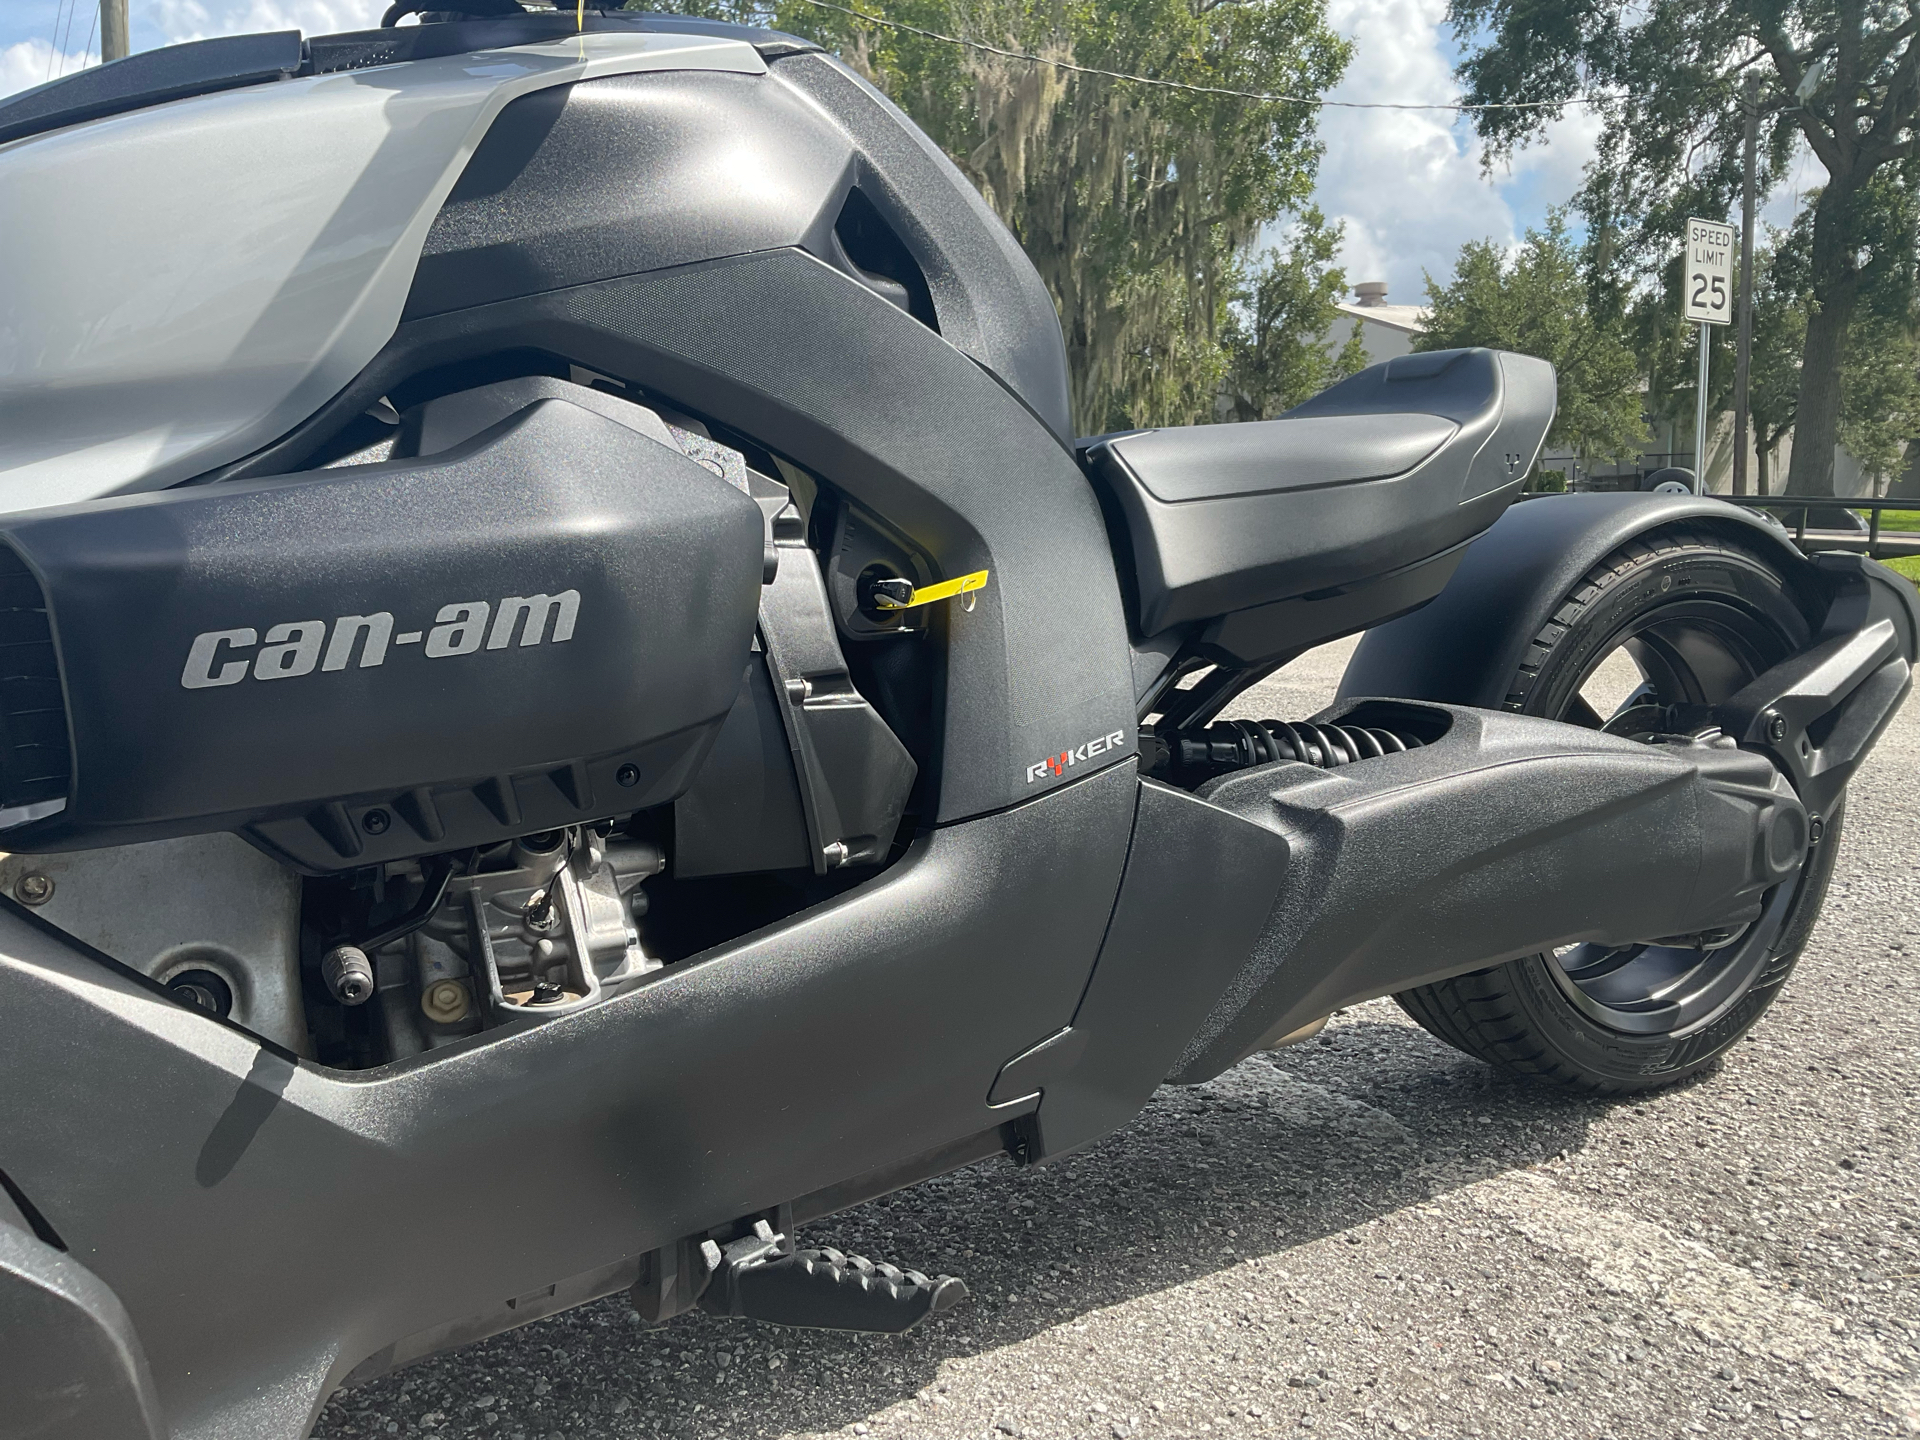 2020 Can-Am Ryker 900 ACE in Sanford, Florida - Photo 20